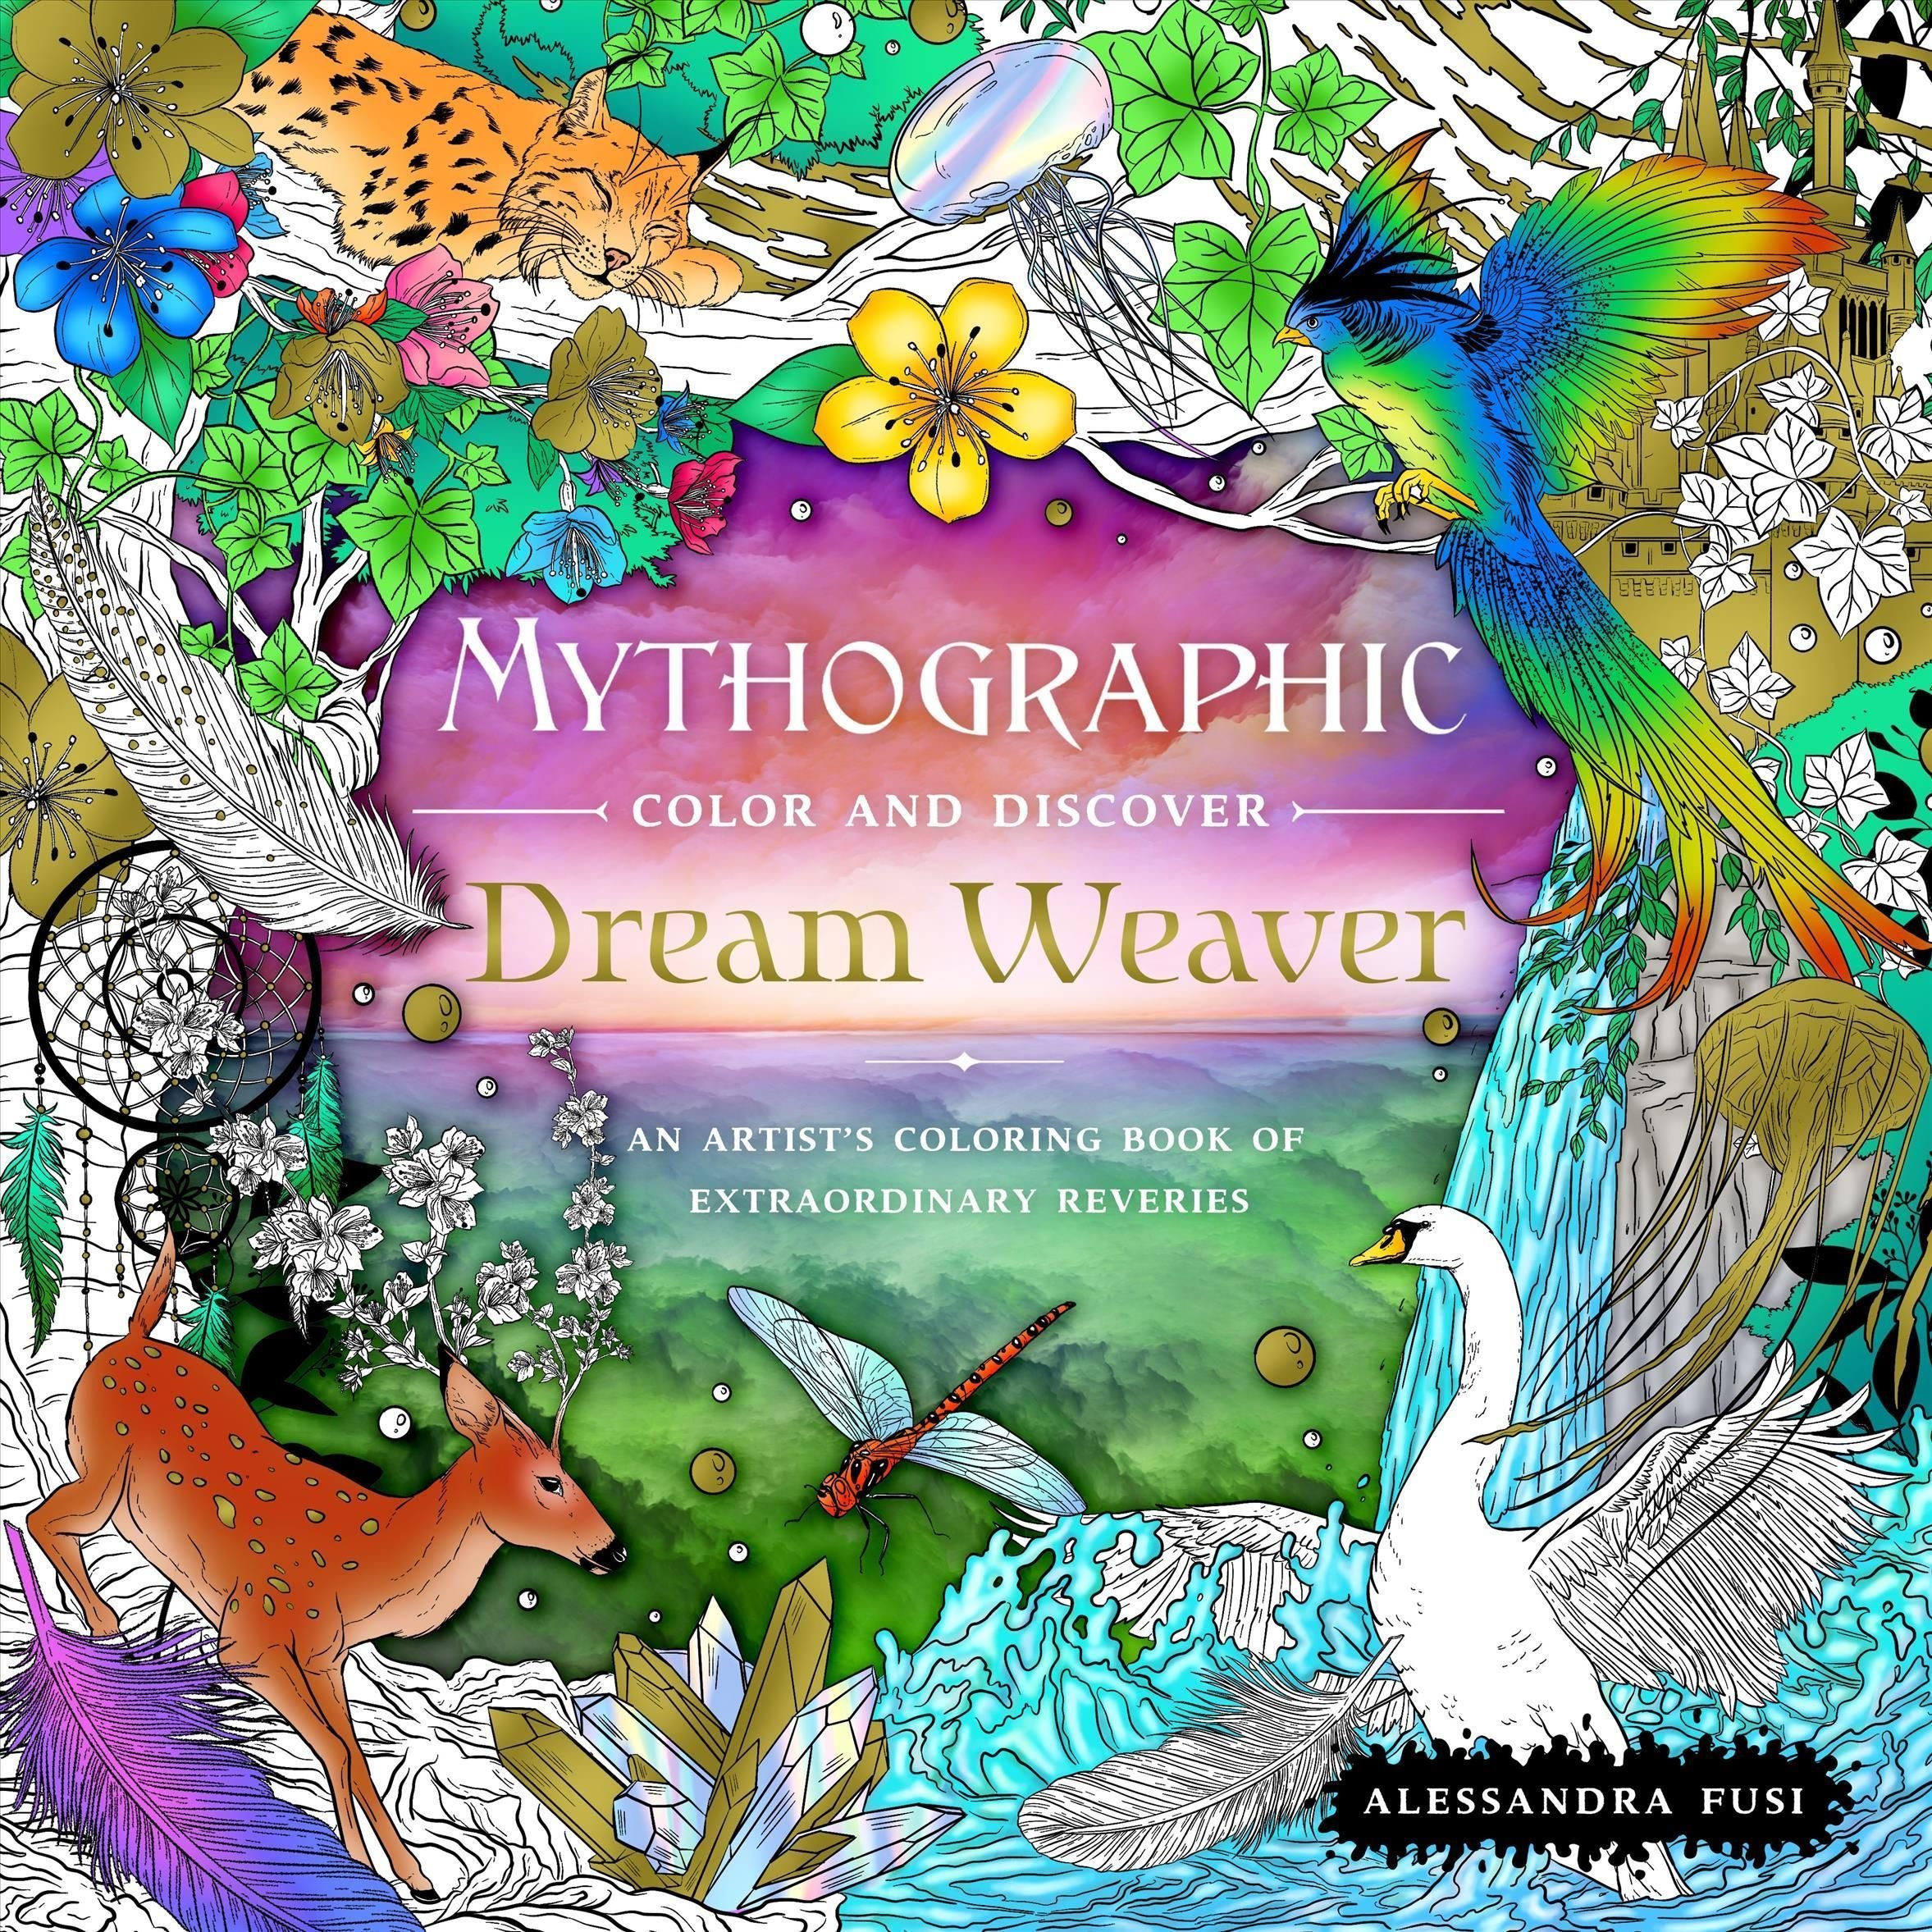 Mythographic Color and Discover: Odyssey: An Artist's Coloring Book of Mythic Journeys and Hidden Objects [Book]